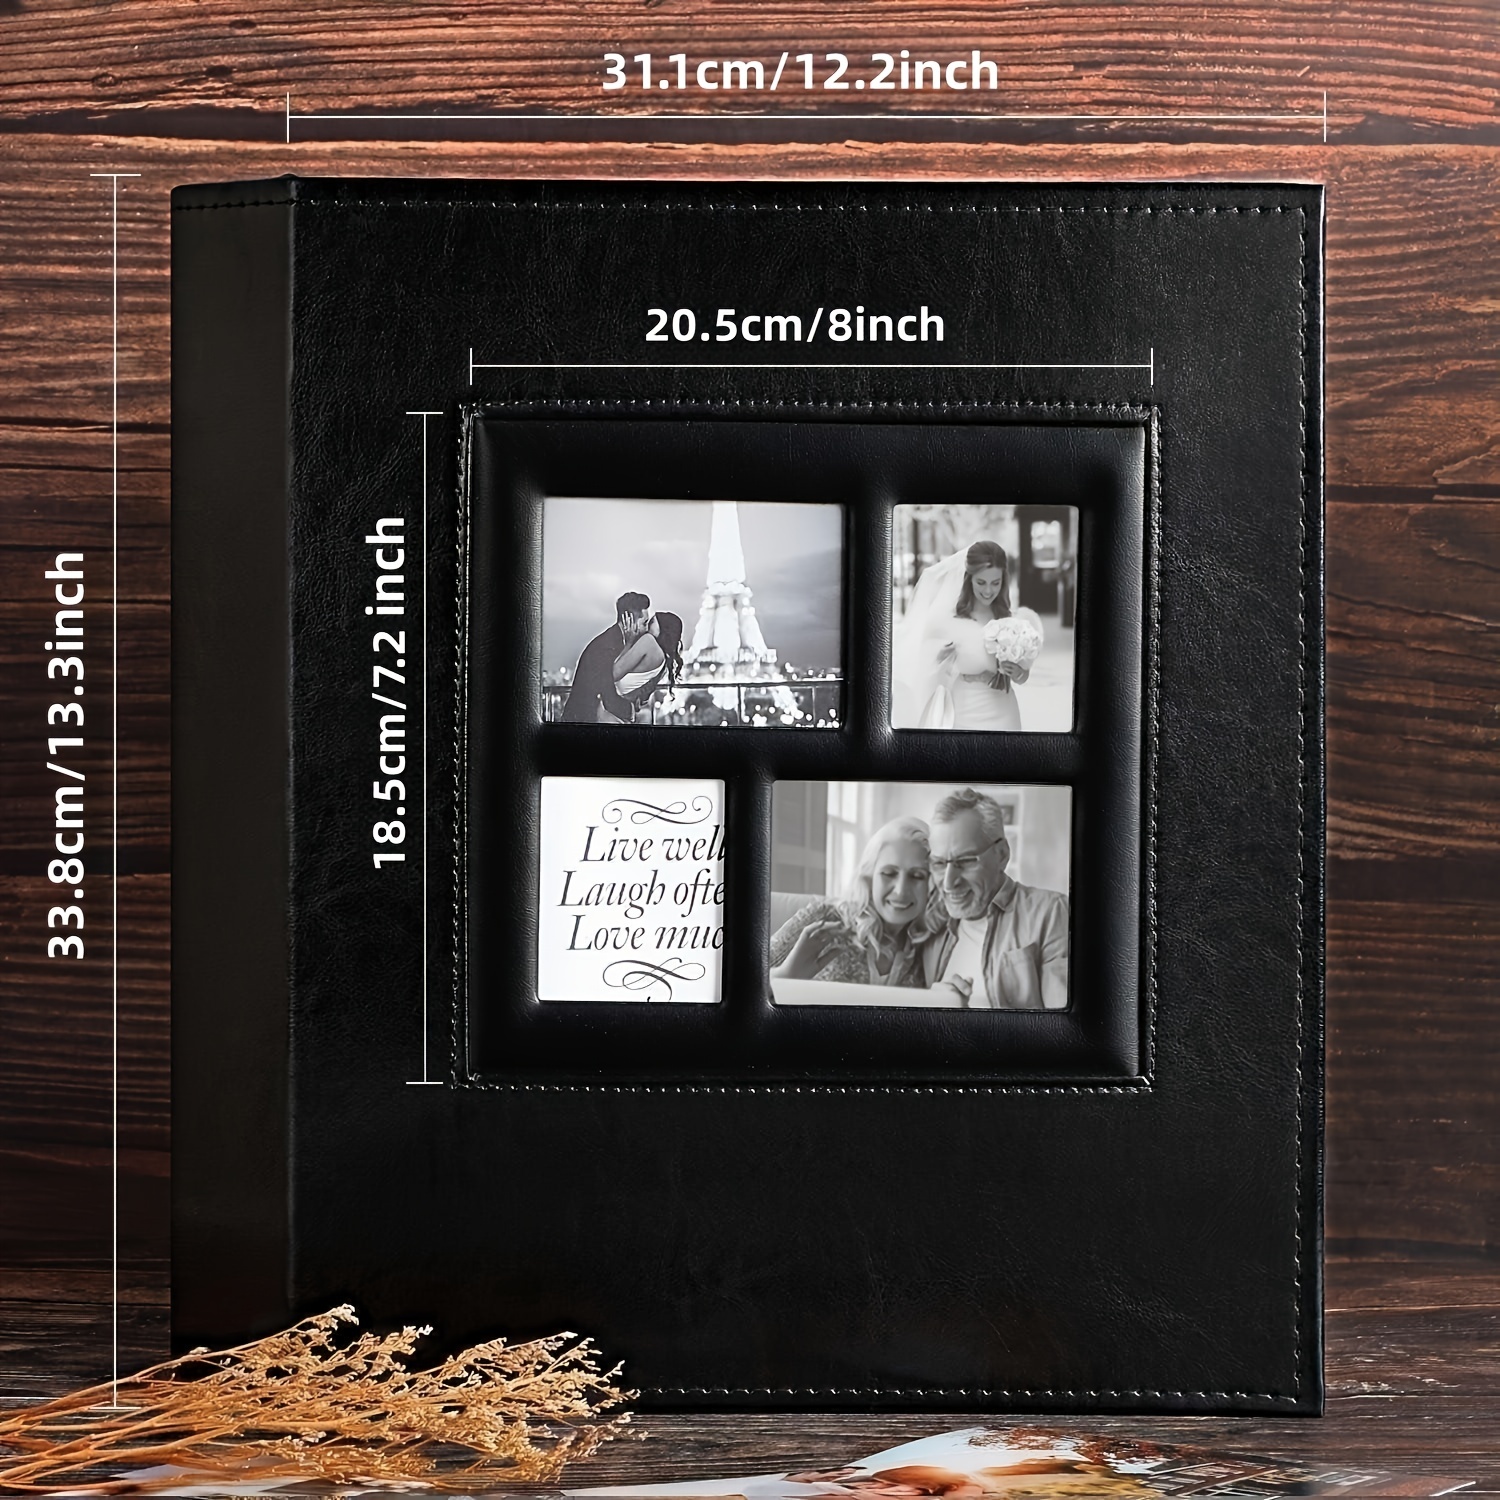  Photo Picutre Album 4x6 500 Photos, Extra Large Capacity  Leather Cover Wedding Family Photo Albums Holds 500 Horizontal and Vertical  4x6 Photos with Black Pages (Black) : Home & Kitchen